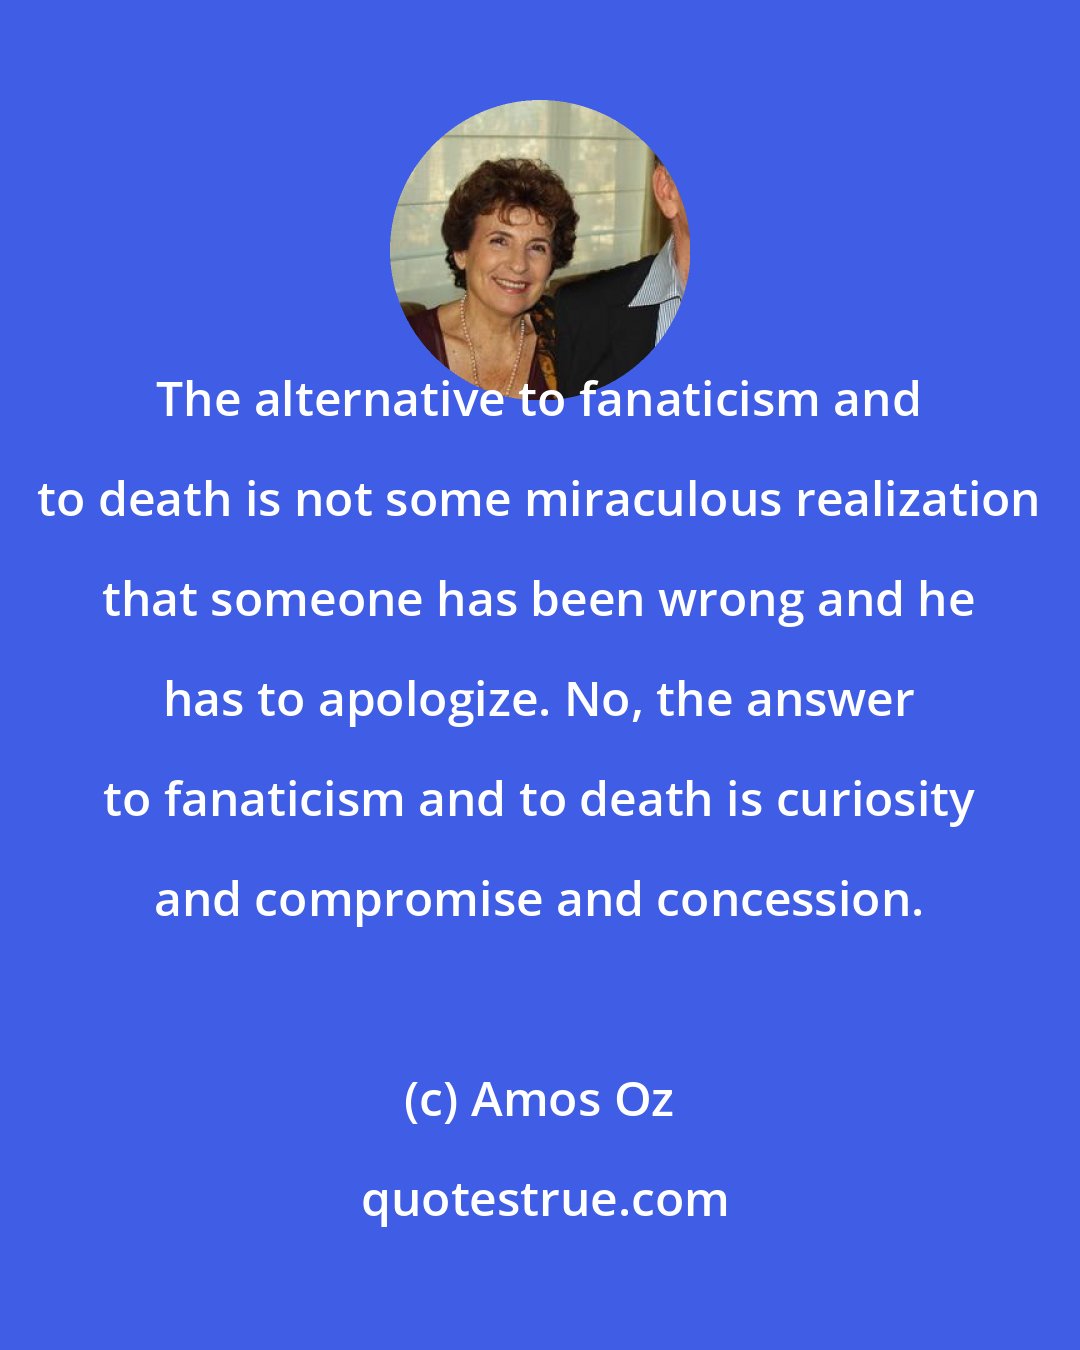 Amos Oz: The alternative to fanaticism and to death is not some miraculous realization that someone has been wrong and he has to apologize. No, the answer to fanaticism and to death is curiosity and compromise and concession.